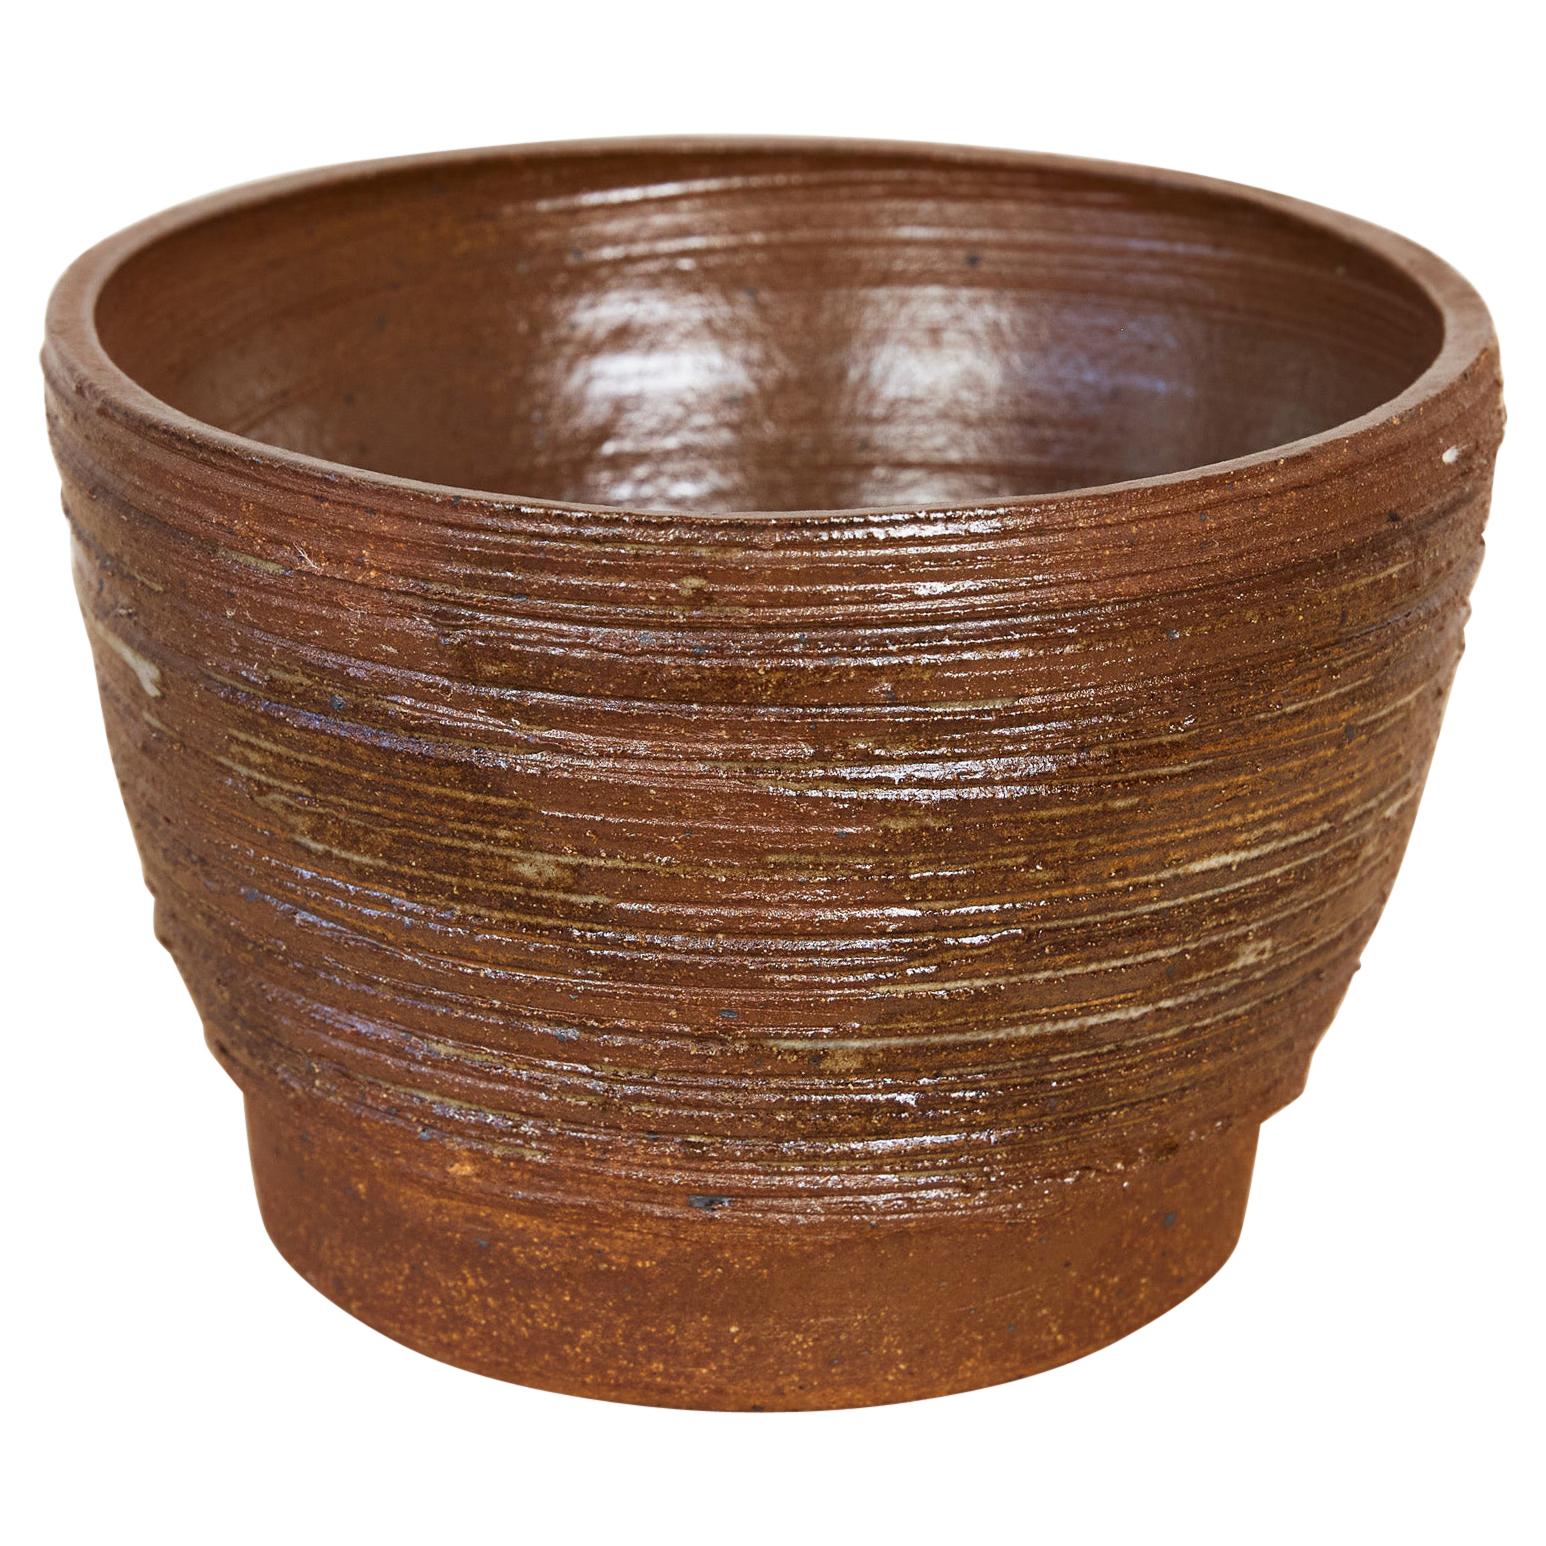 Ceramic Vessel with Incised Striated Pattern